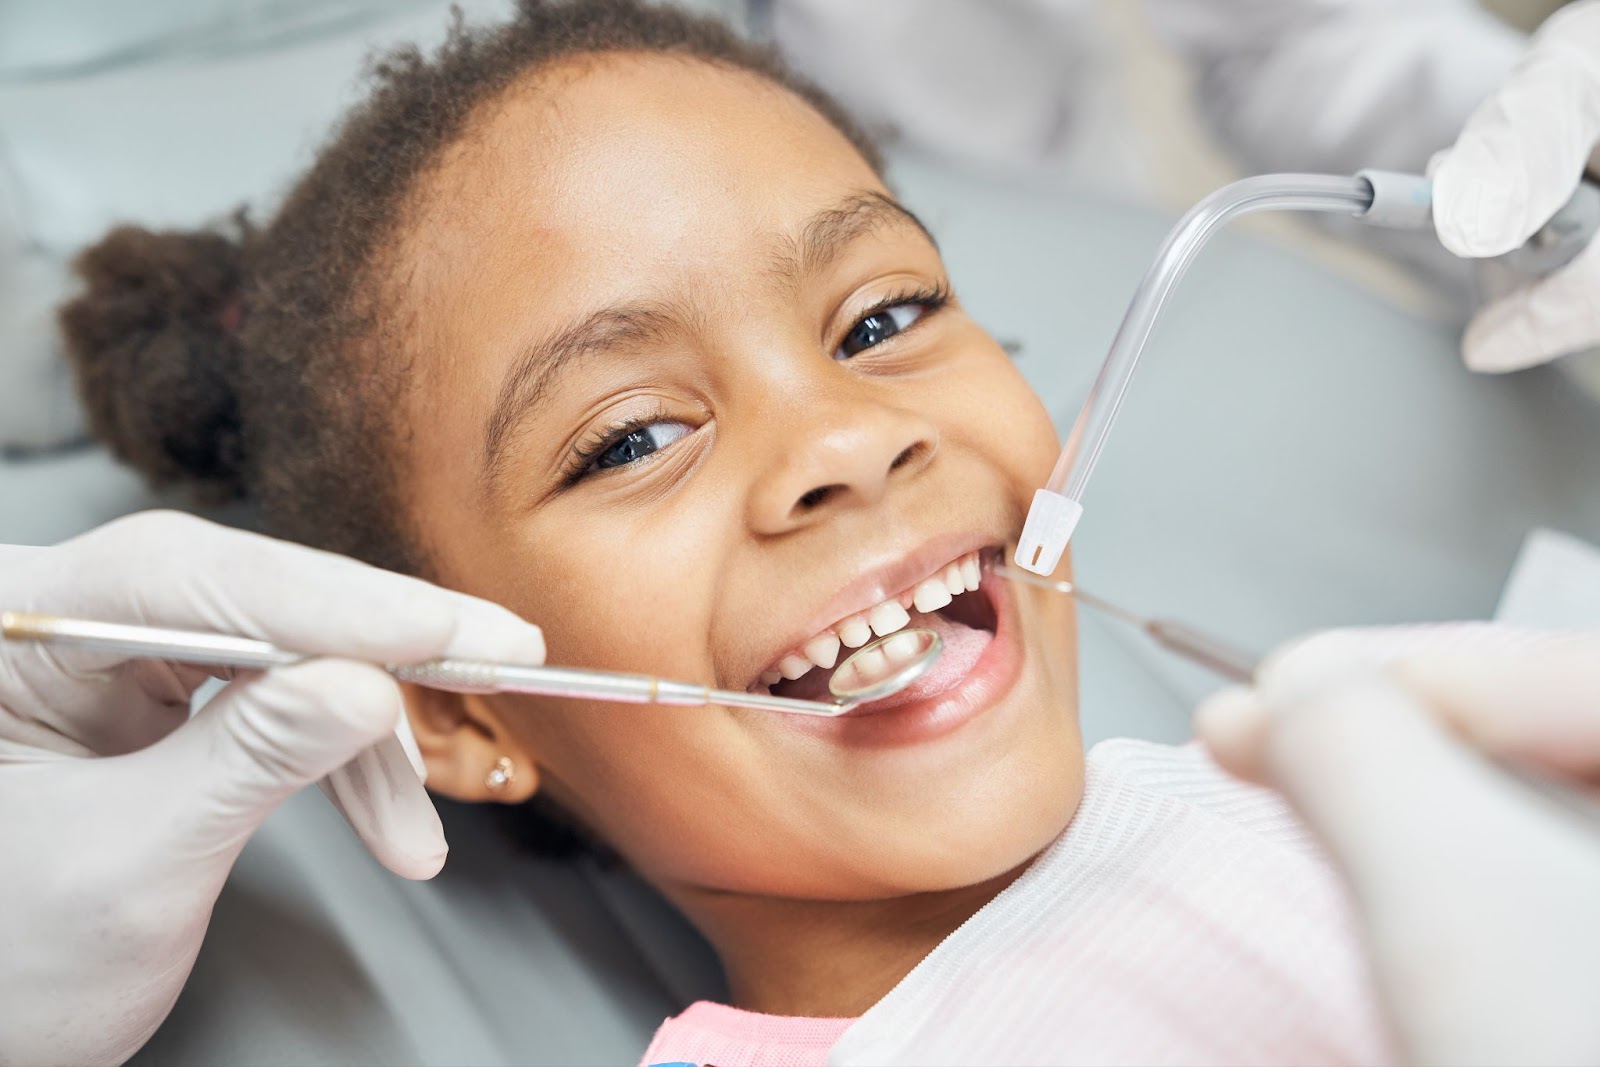 The Mack Orthodontics team believes starting early is the best way to create a great smile. It's doable due to the benefits of two-phase treatment.